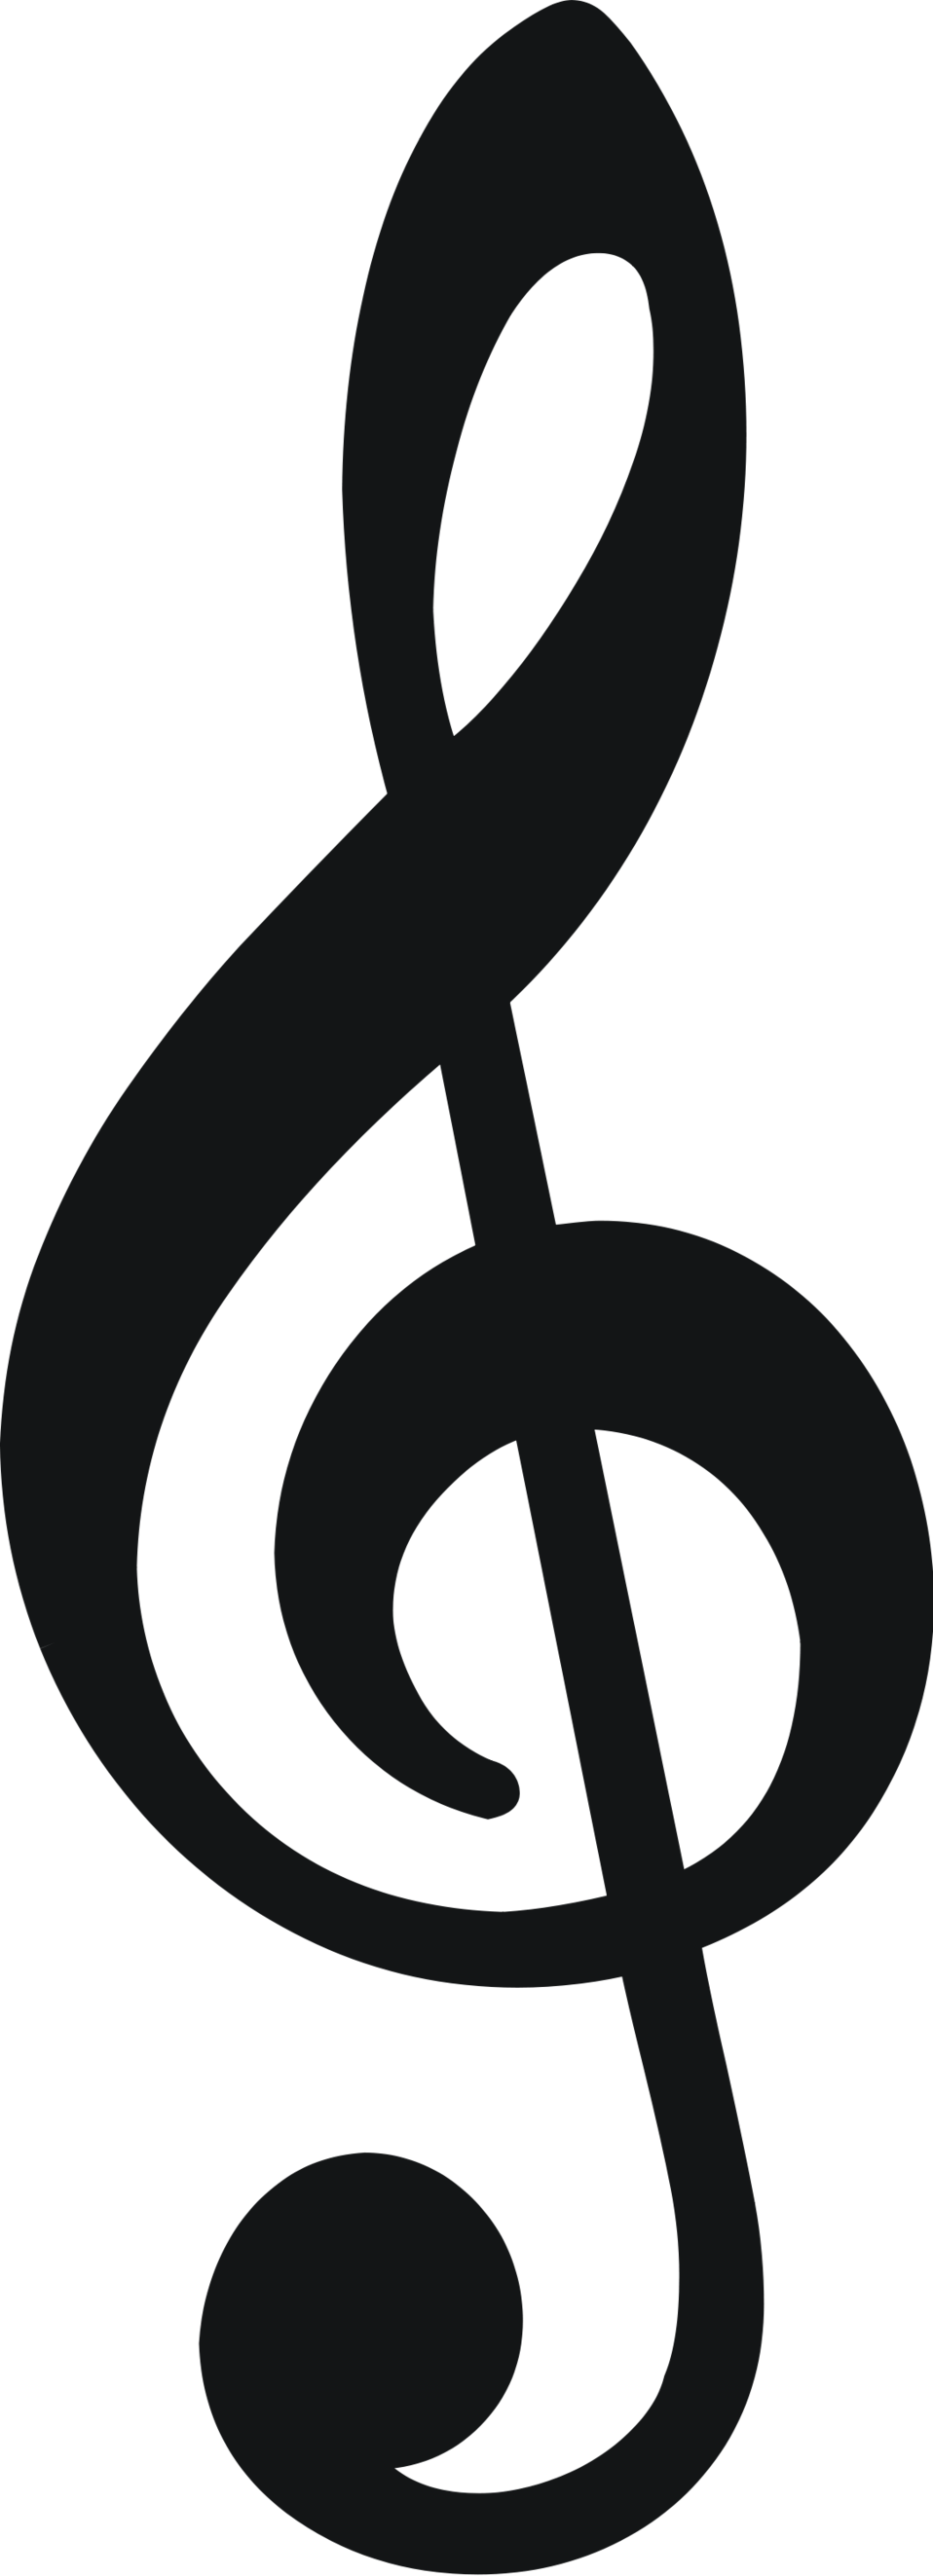 Free Treble Clef Images, Download Free Treble Clef Images png images